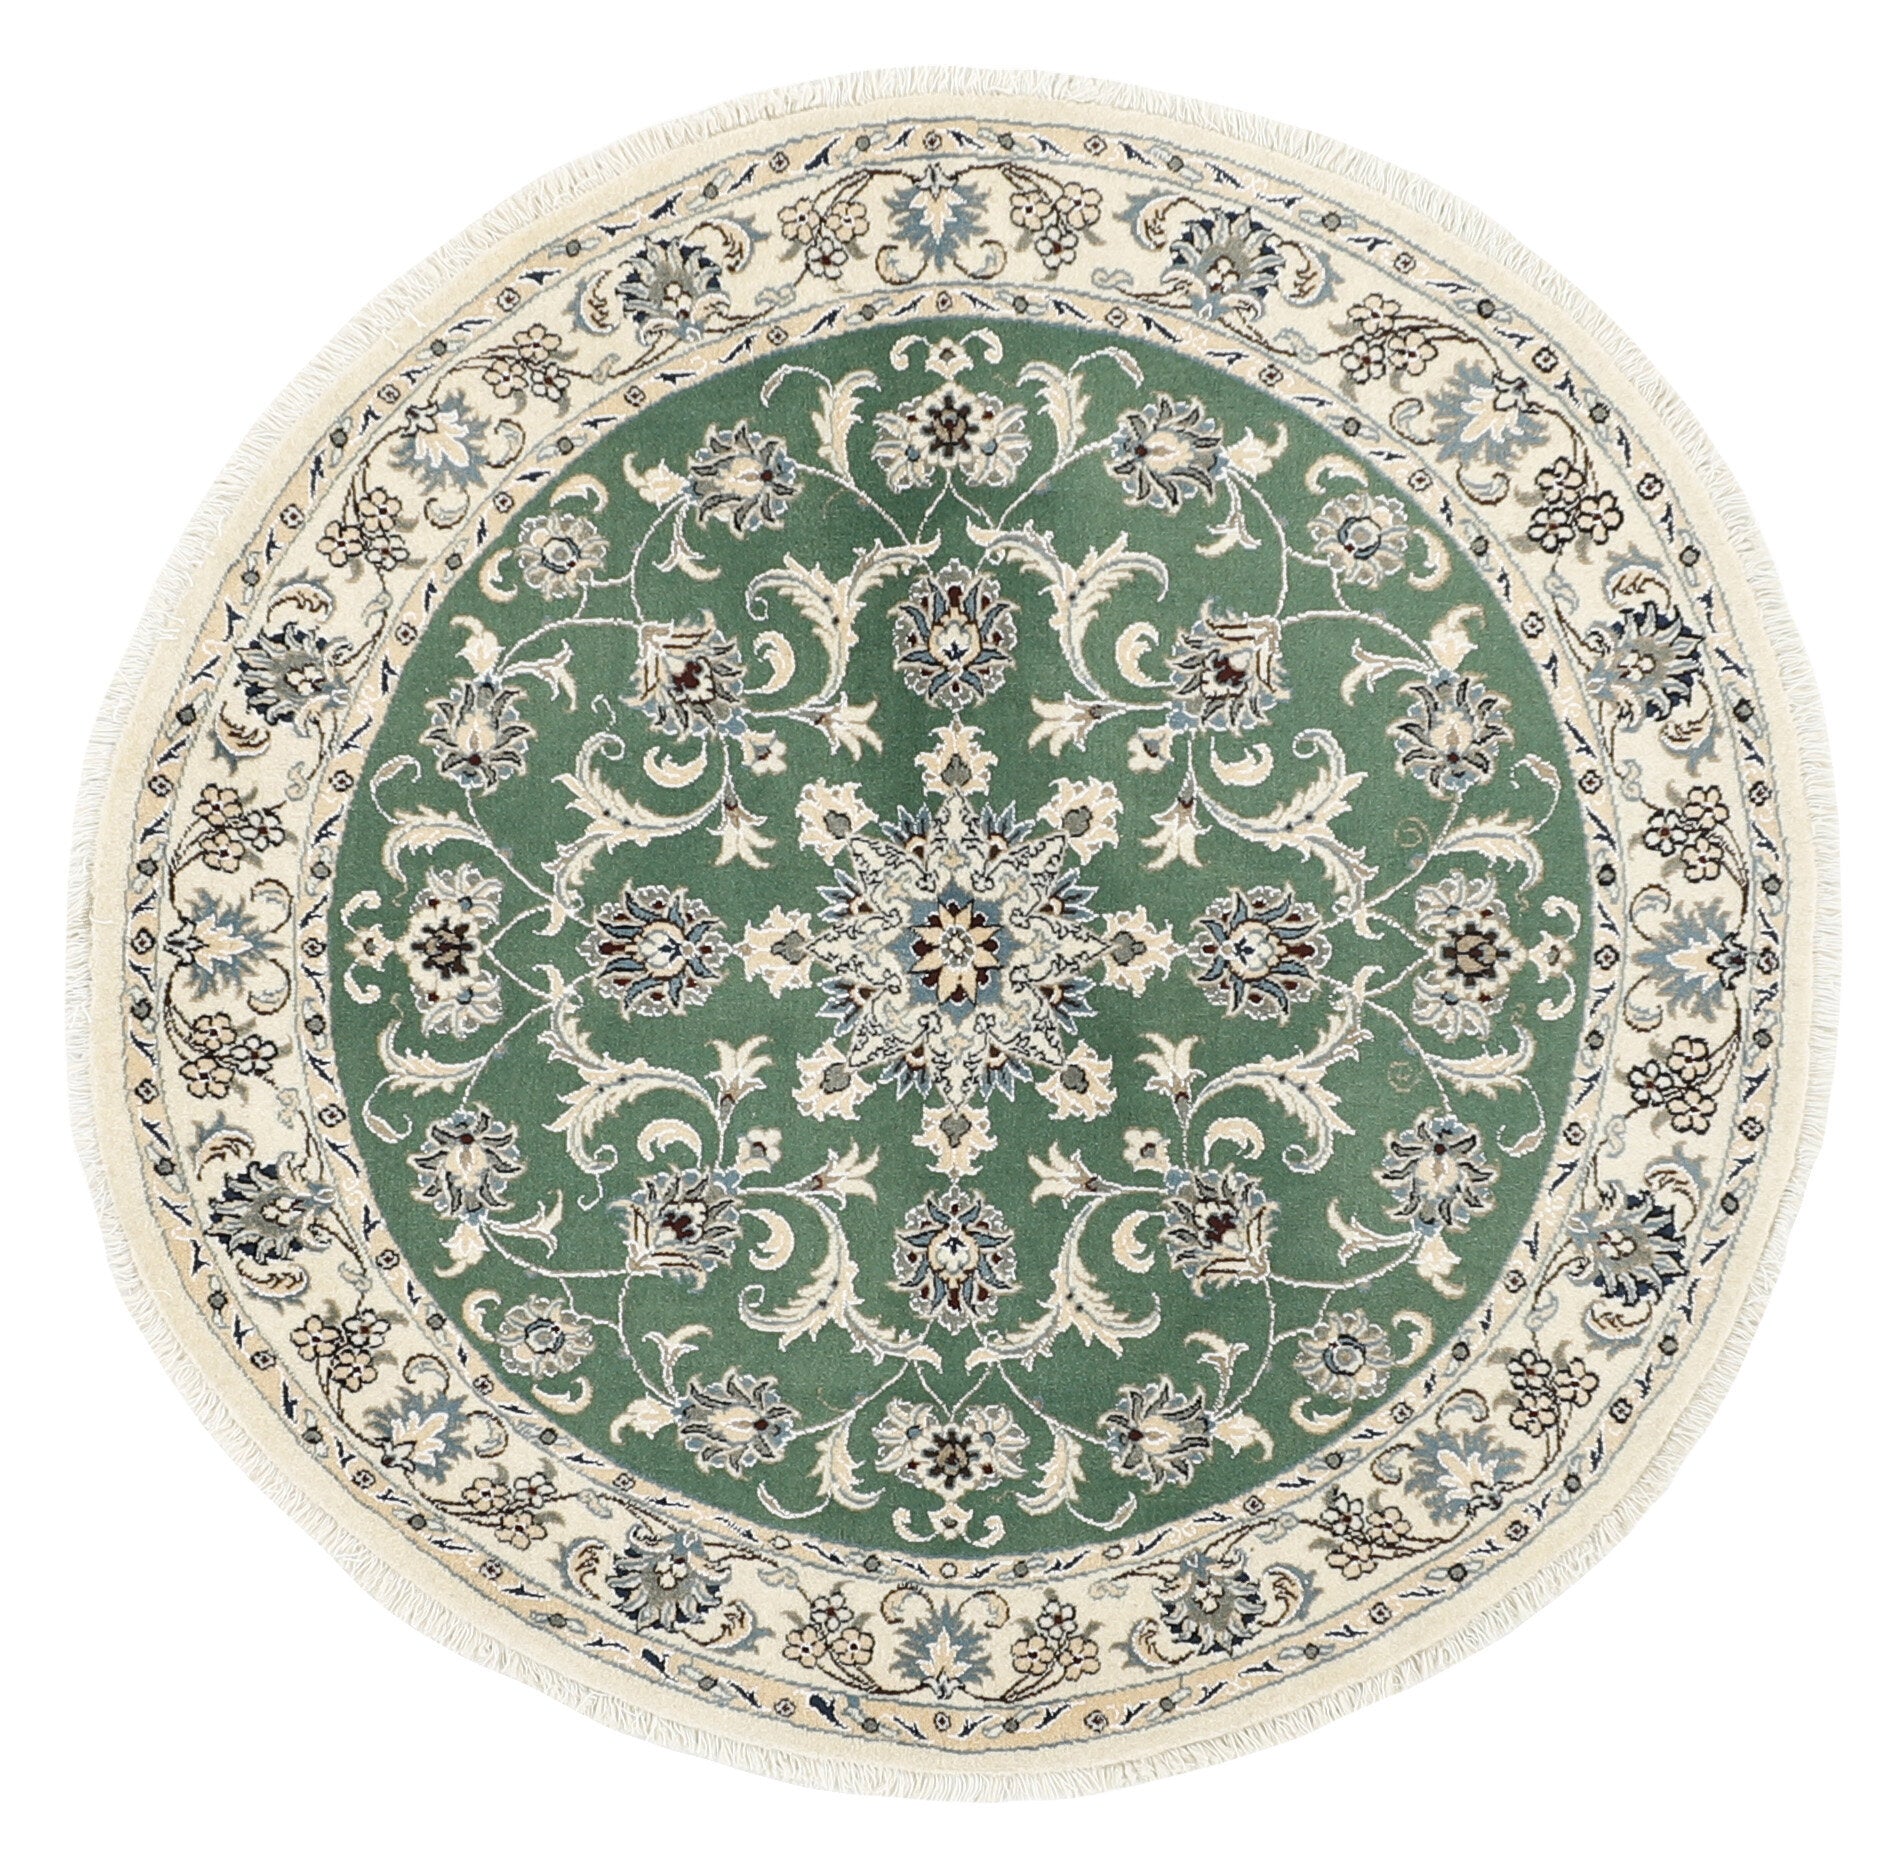 Authentic persian circle rug with a traditional floral design in green, blue, beige, brown and black